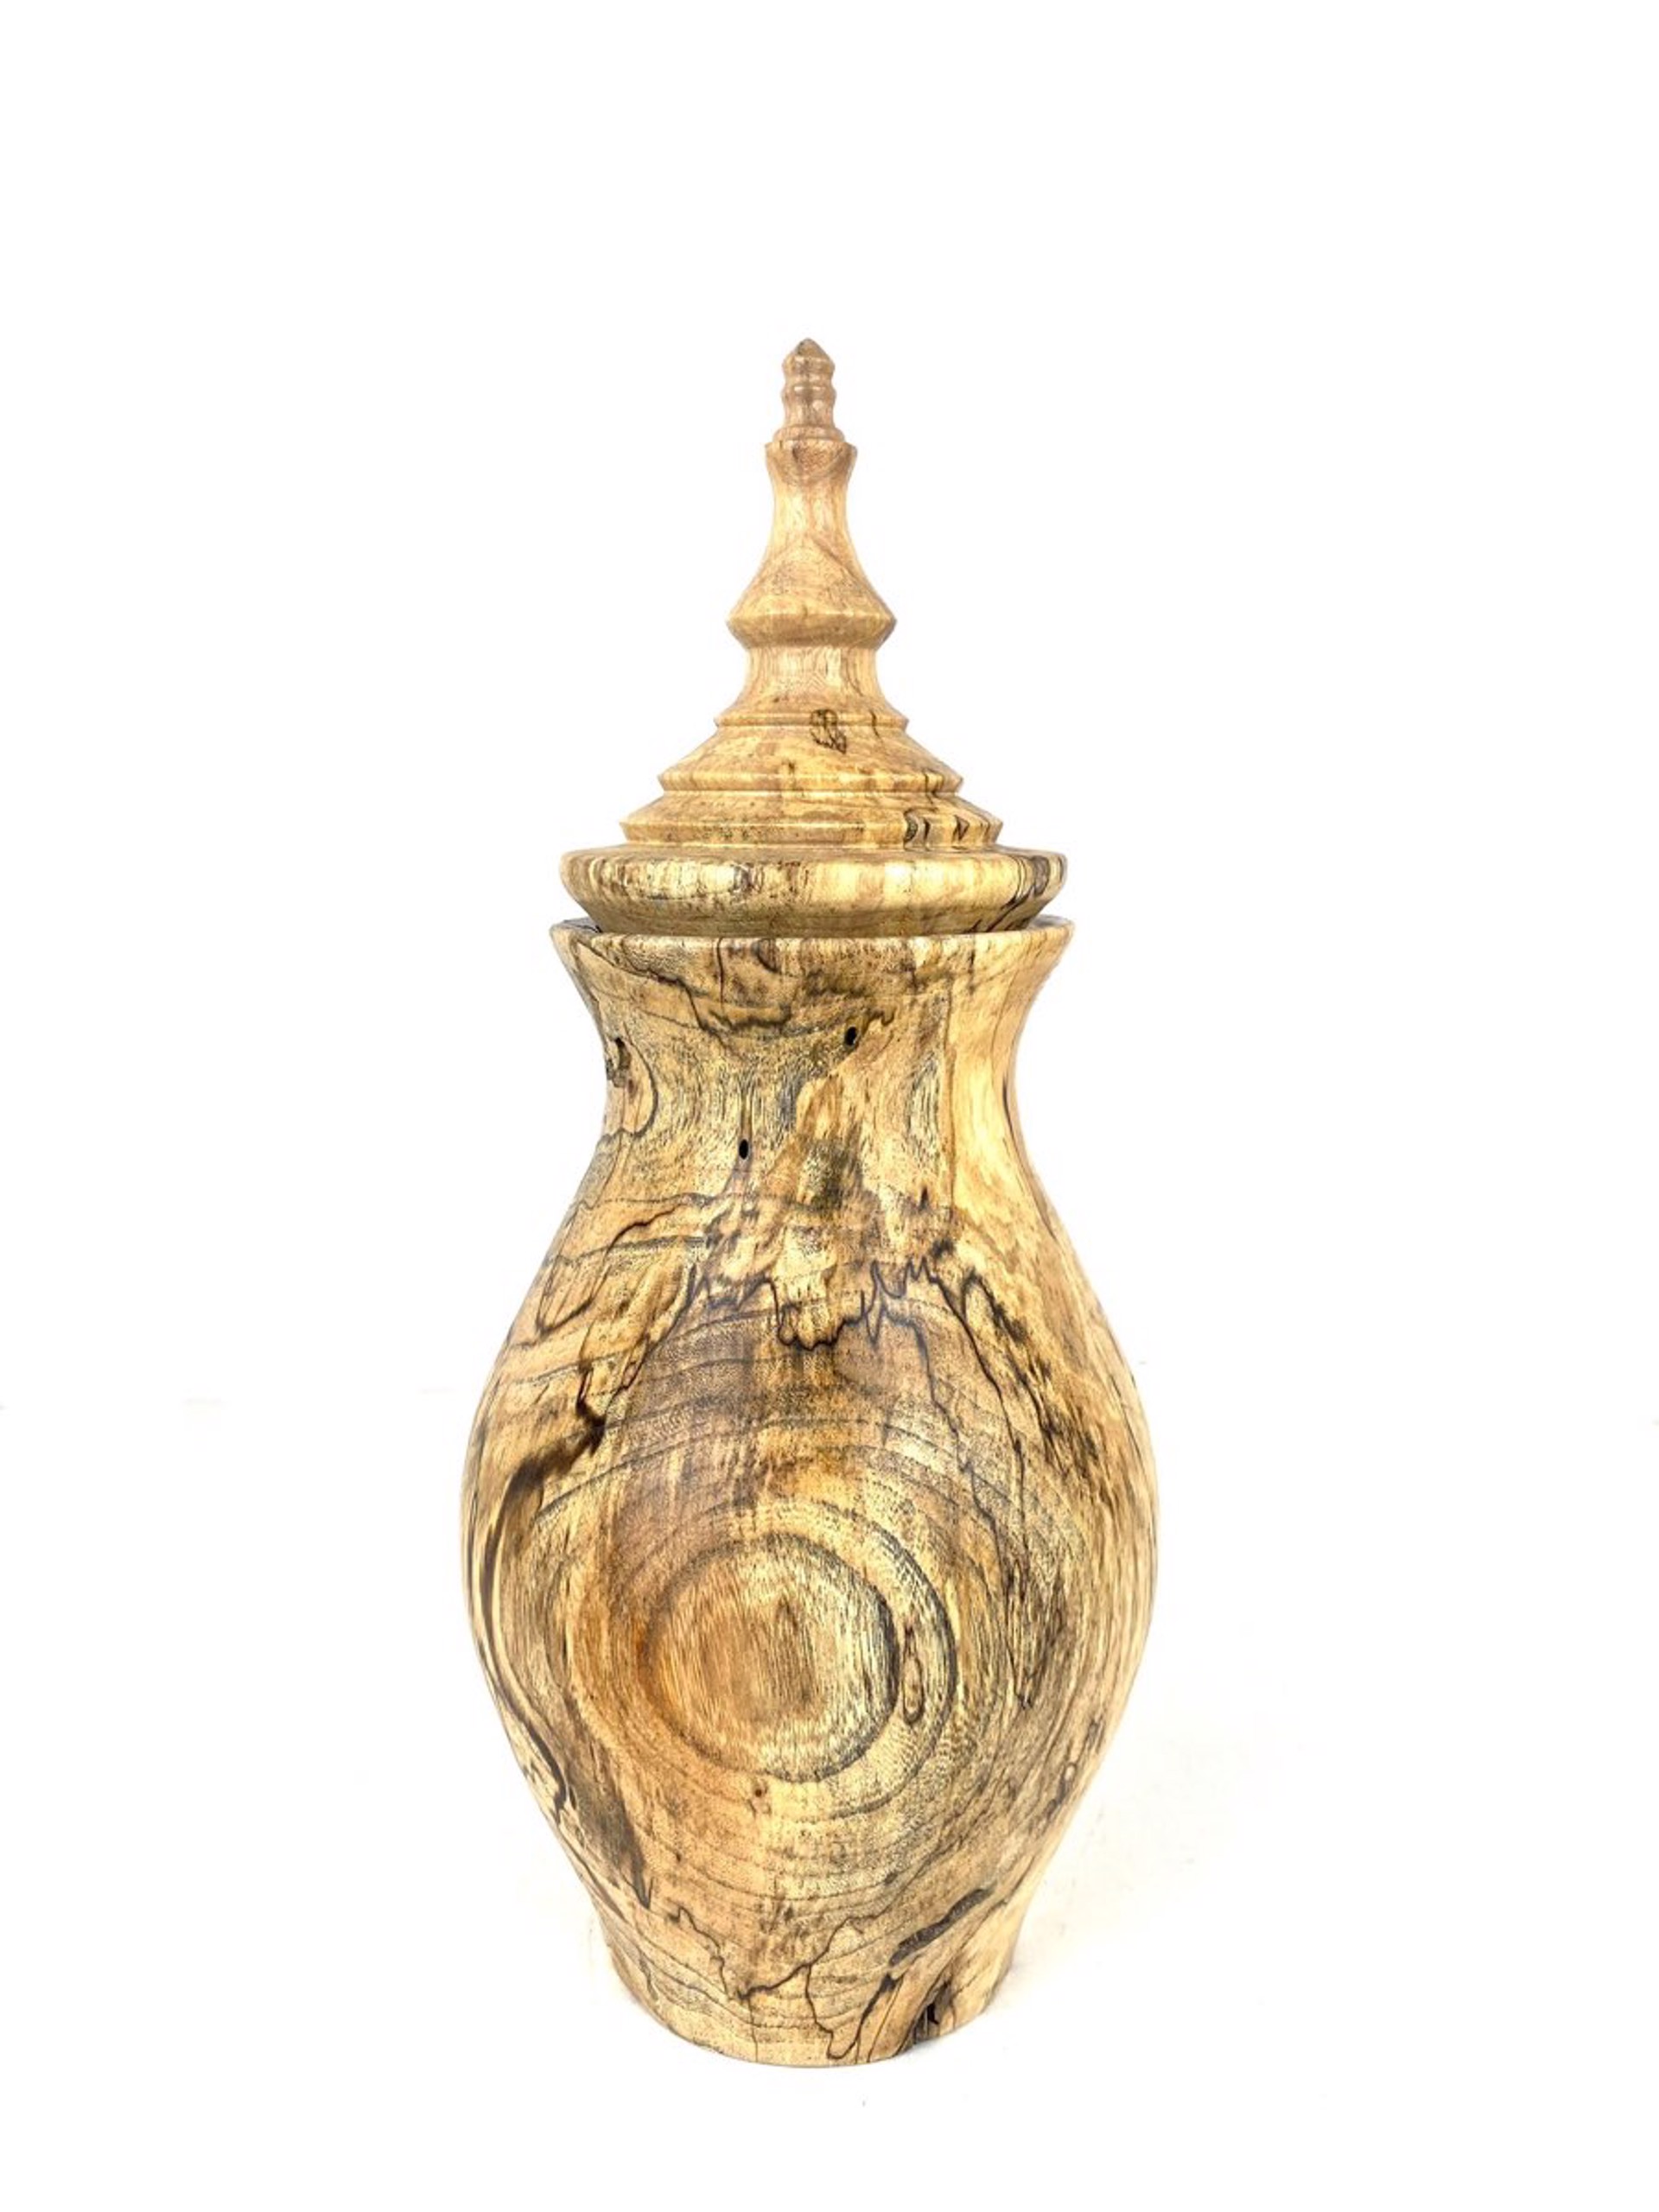 Dogwood Vase with Finial by Don Moore